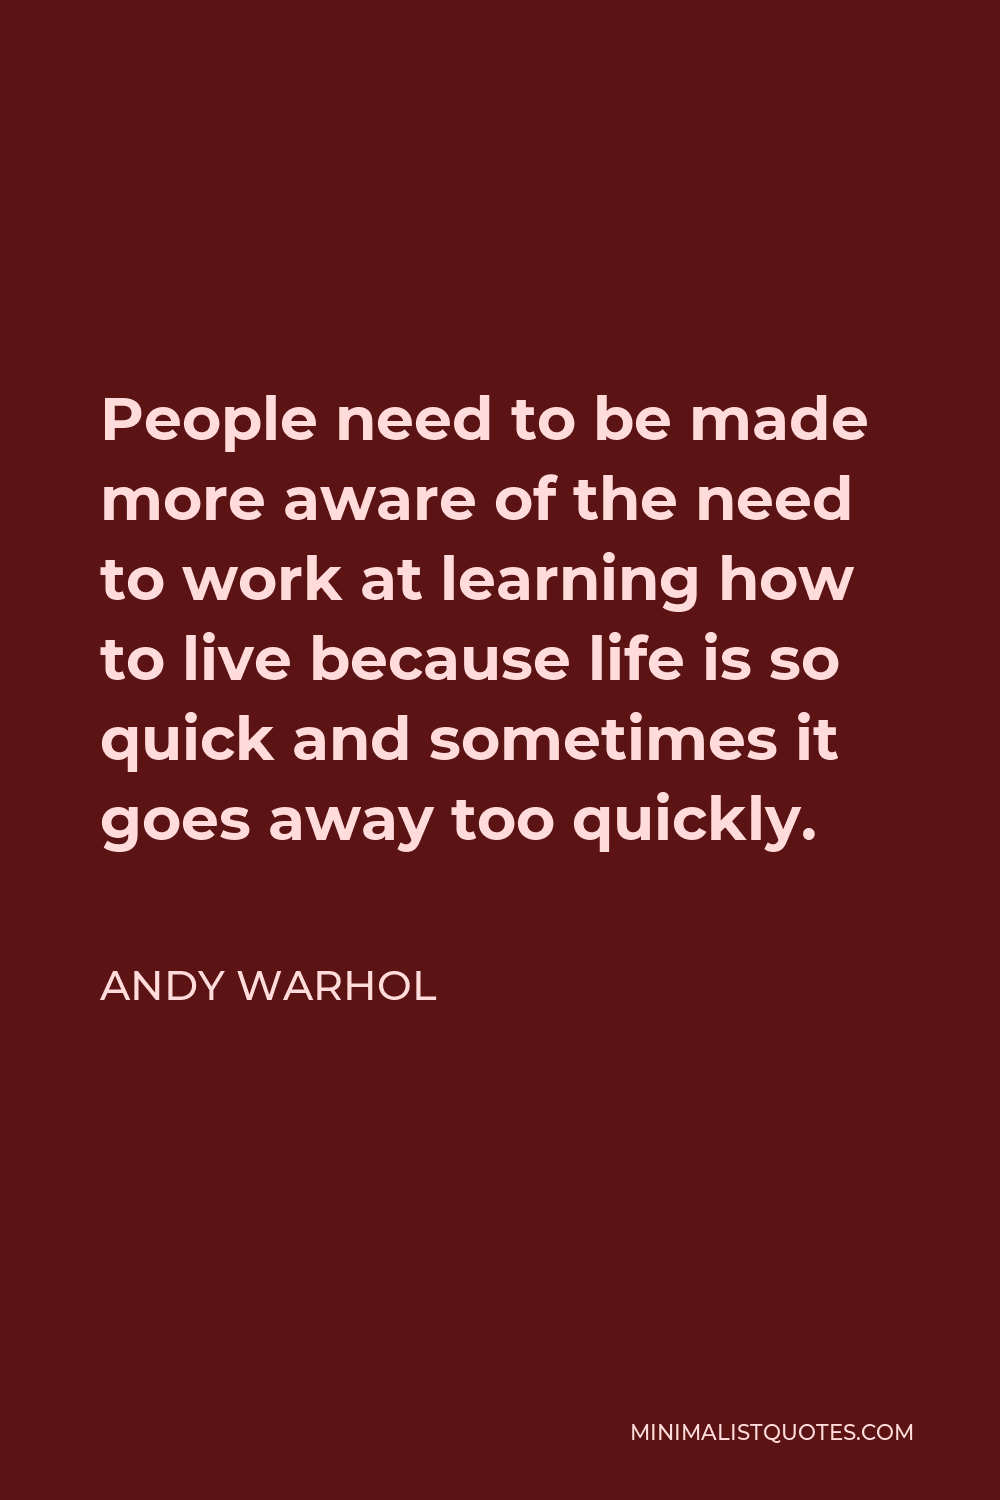 Andy Warhol Quote - People need to be made more aware of the need to work at learning how to live because life is so quick and sometimes it goes away too quickly.